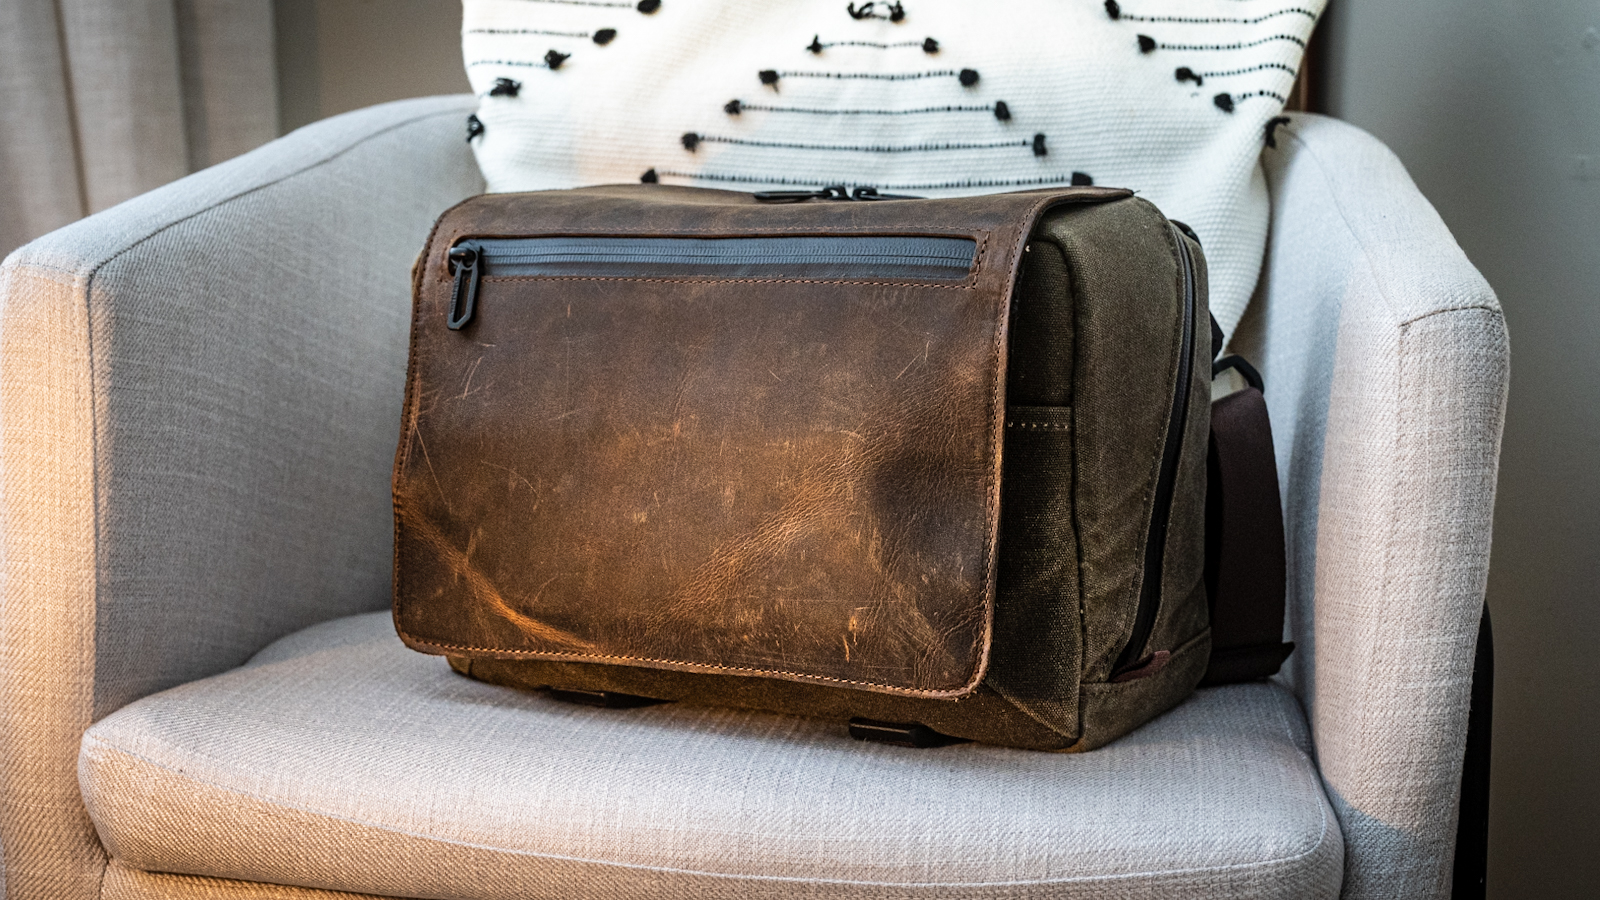 WaterField Cargo Camera Bag Review